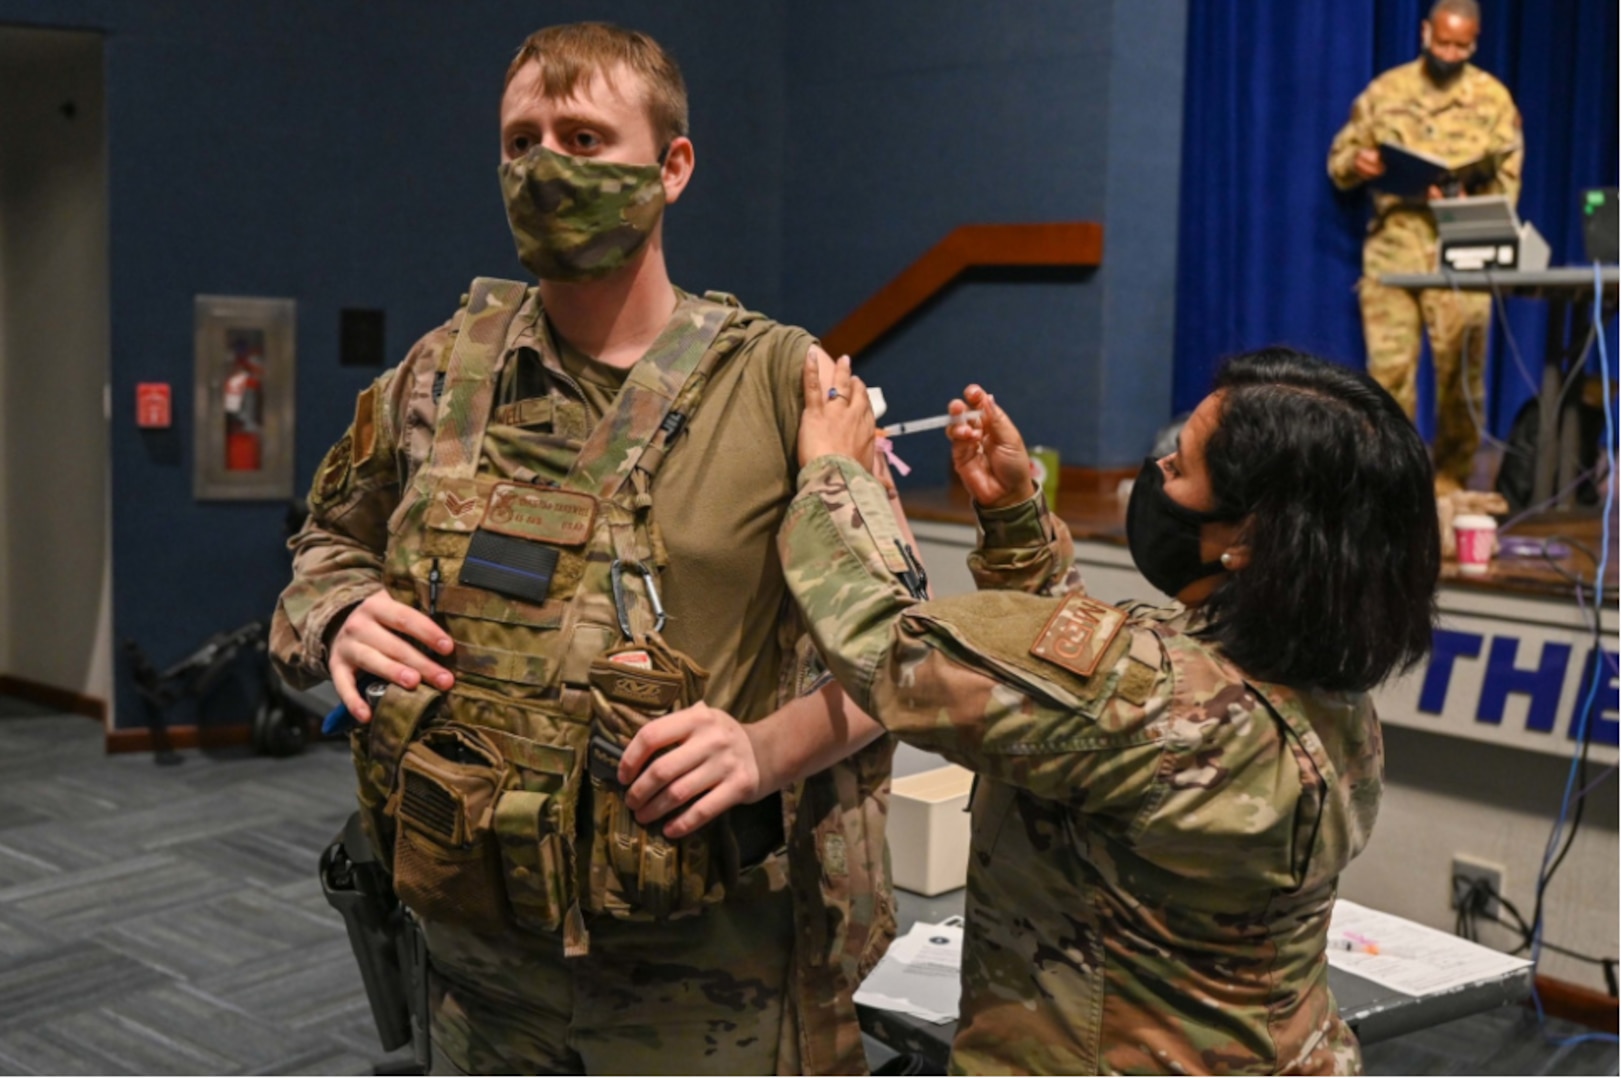 Senior Airman Christian Cardwell, 45th Security Forces Squadron Defender, receives a COVID-19 vaccine at Patrick Space Force Base, Fla., Jan. 14, 2021.